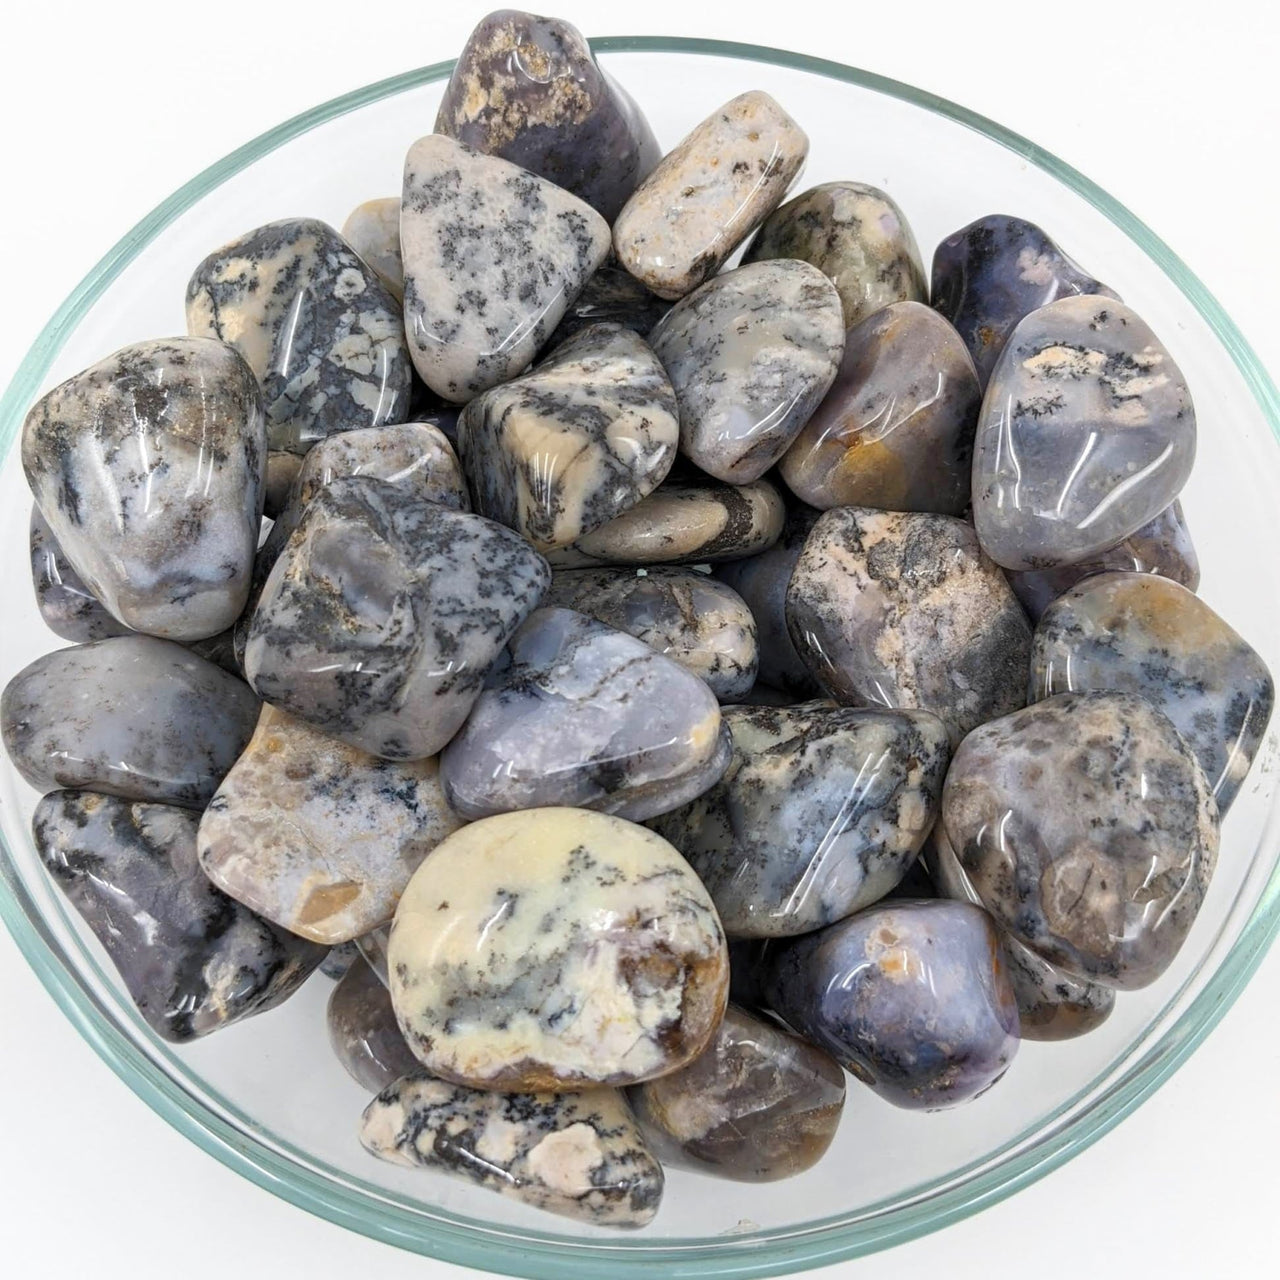 Close-up of Dendrite Agate Tumbled Stones in a bowl on a white surface, SKU #SK6883